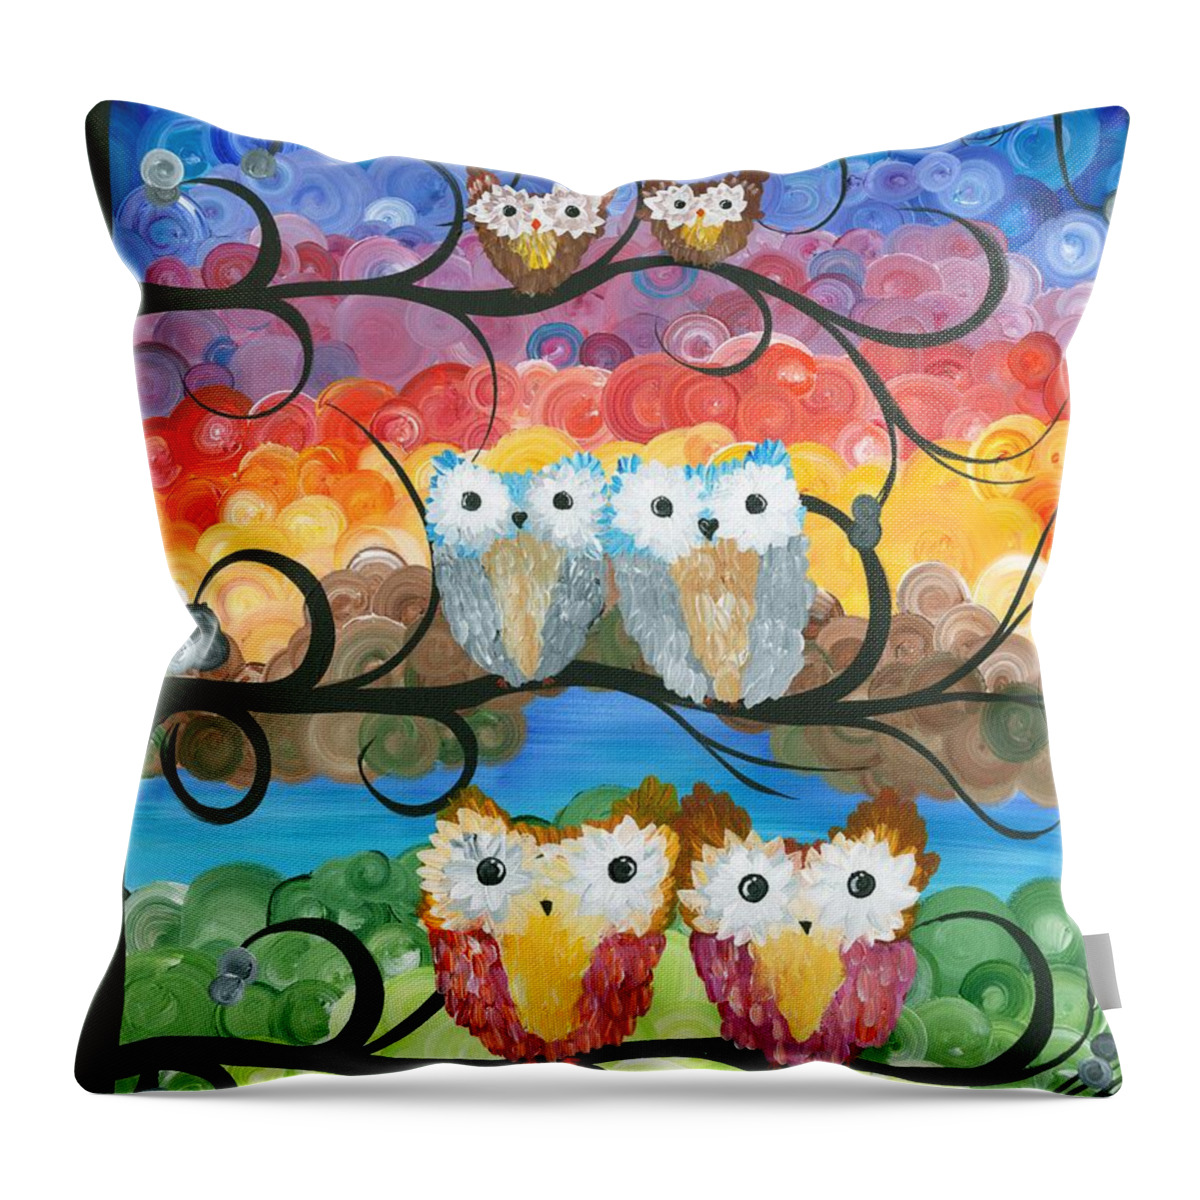 Owls Throw Pillow featuring the painting Owl Expressions - 00 by MiMi Stirn